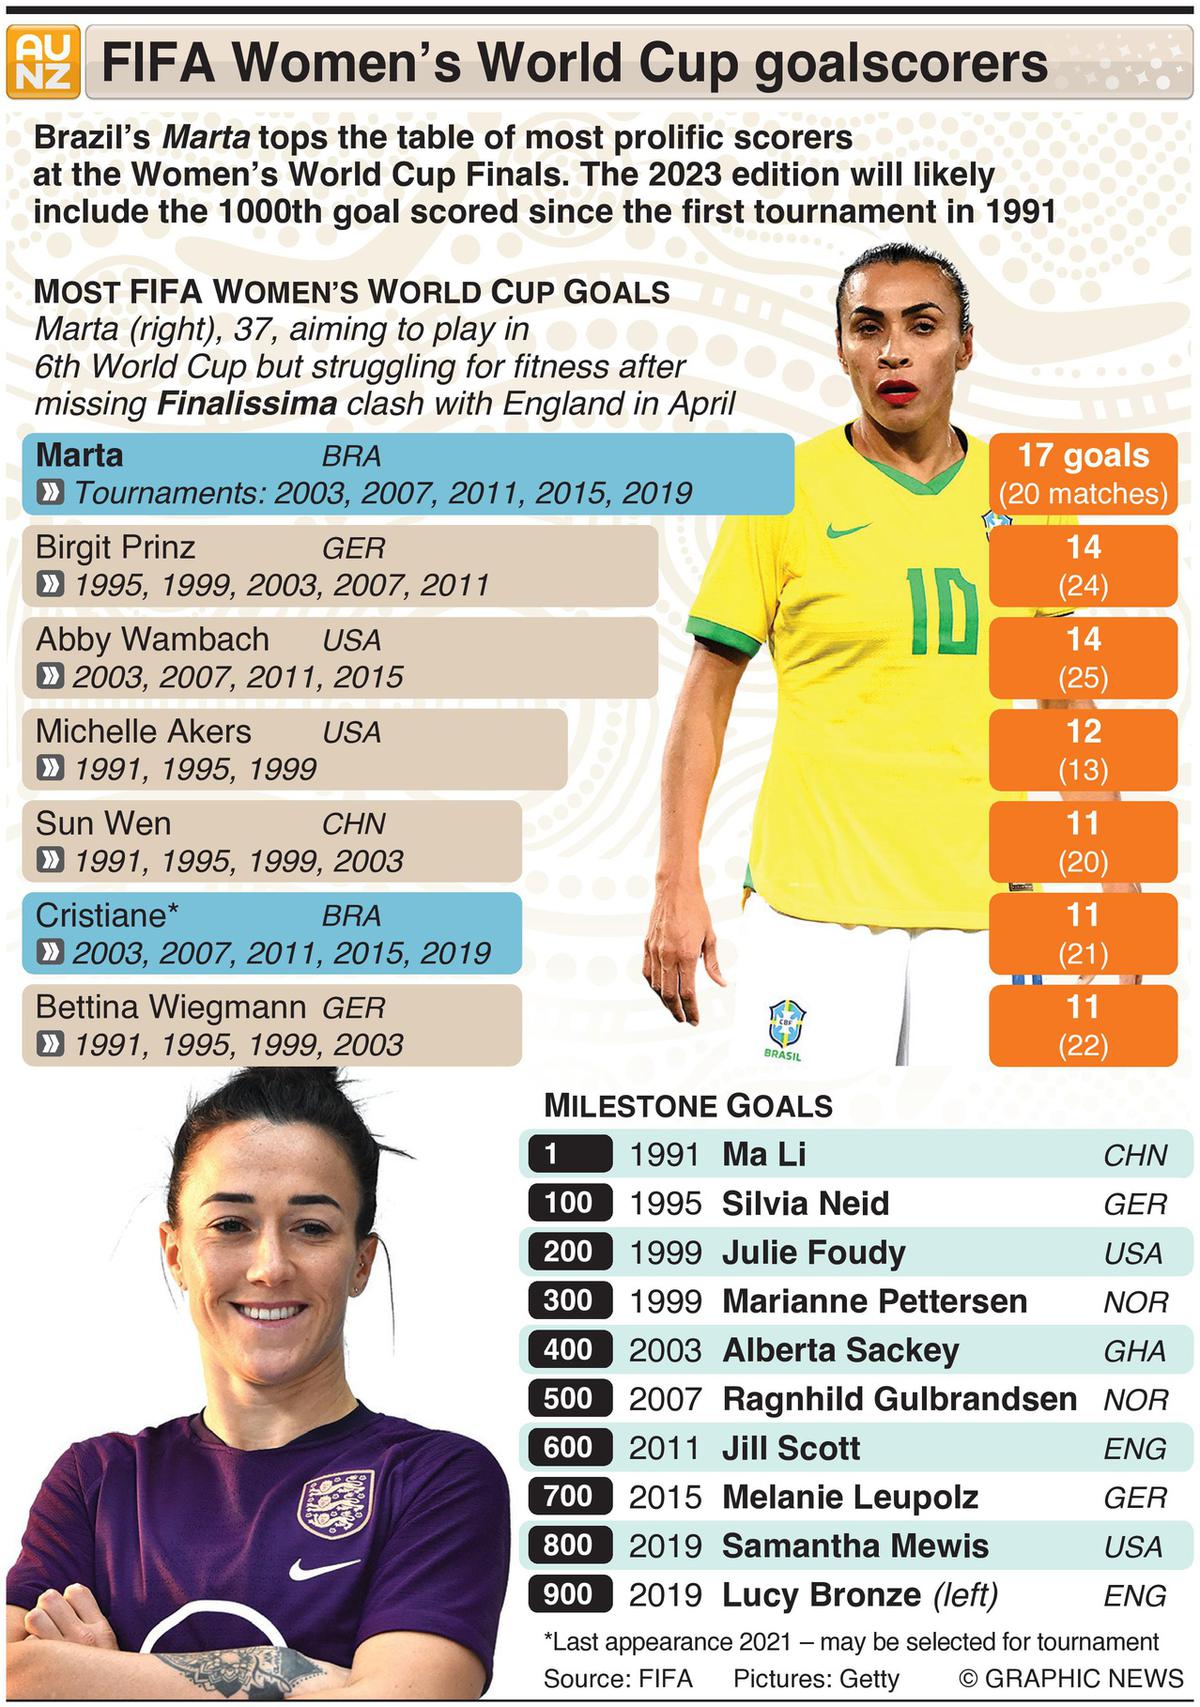 All-Time Top Scorers at the Women's World Cup